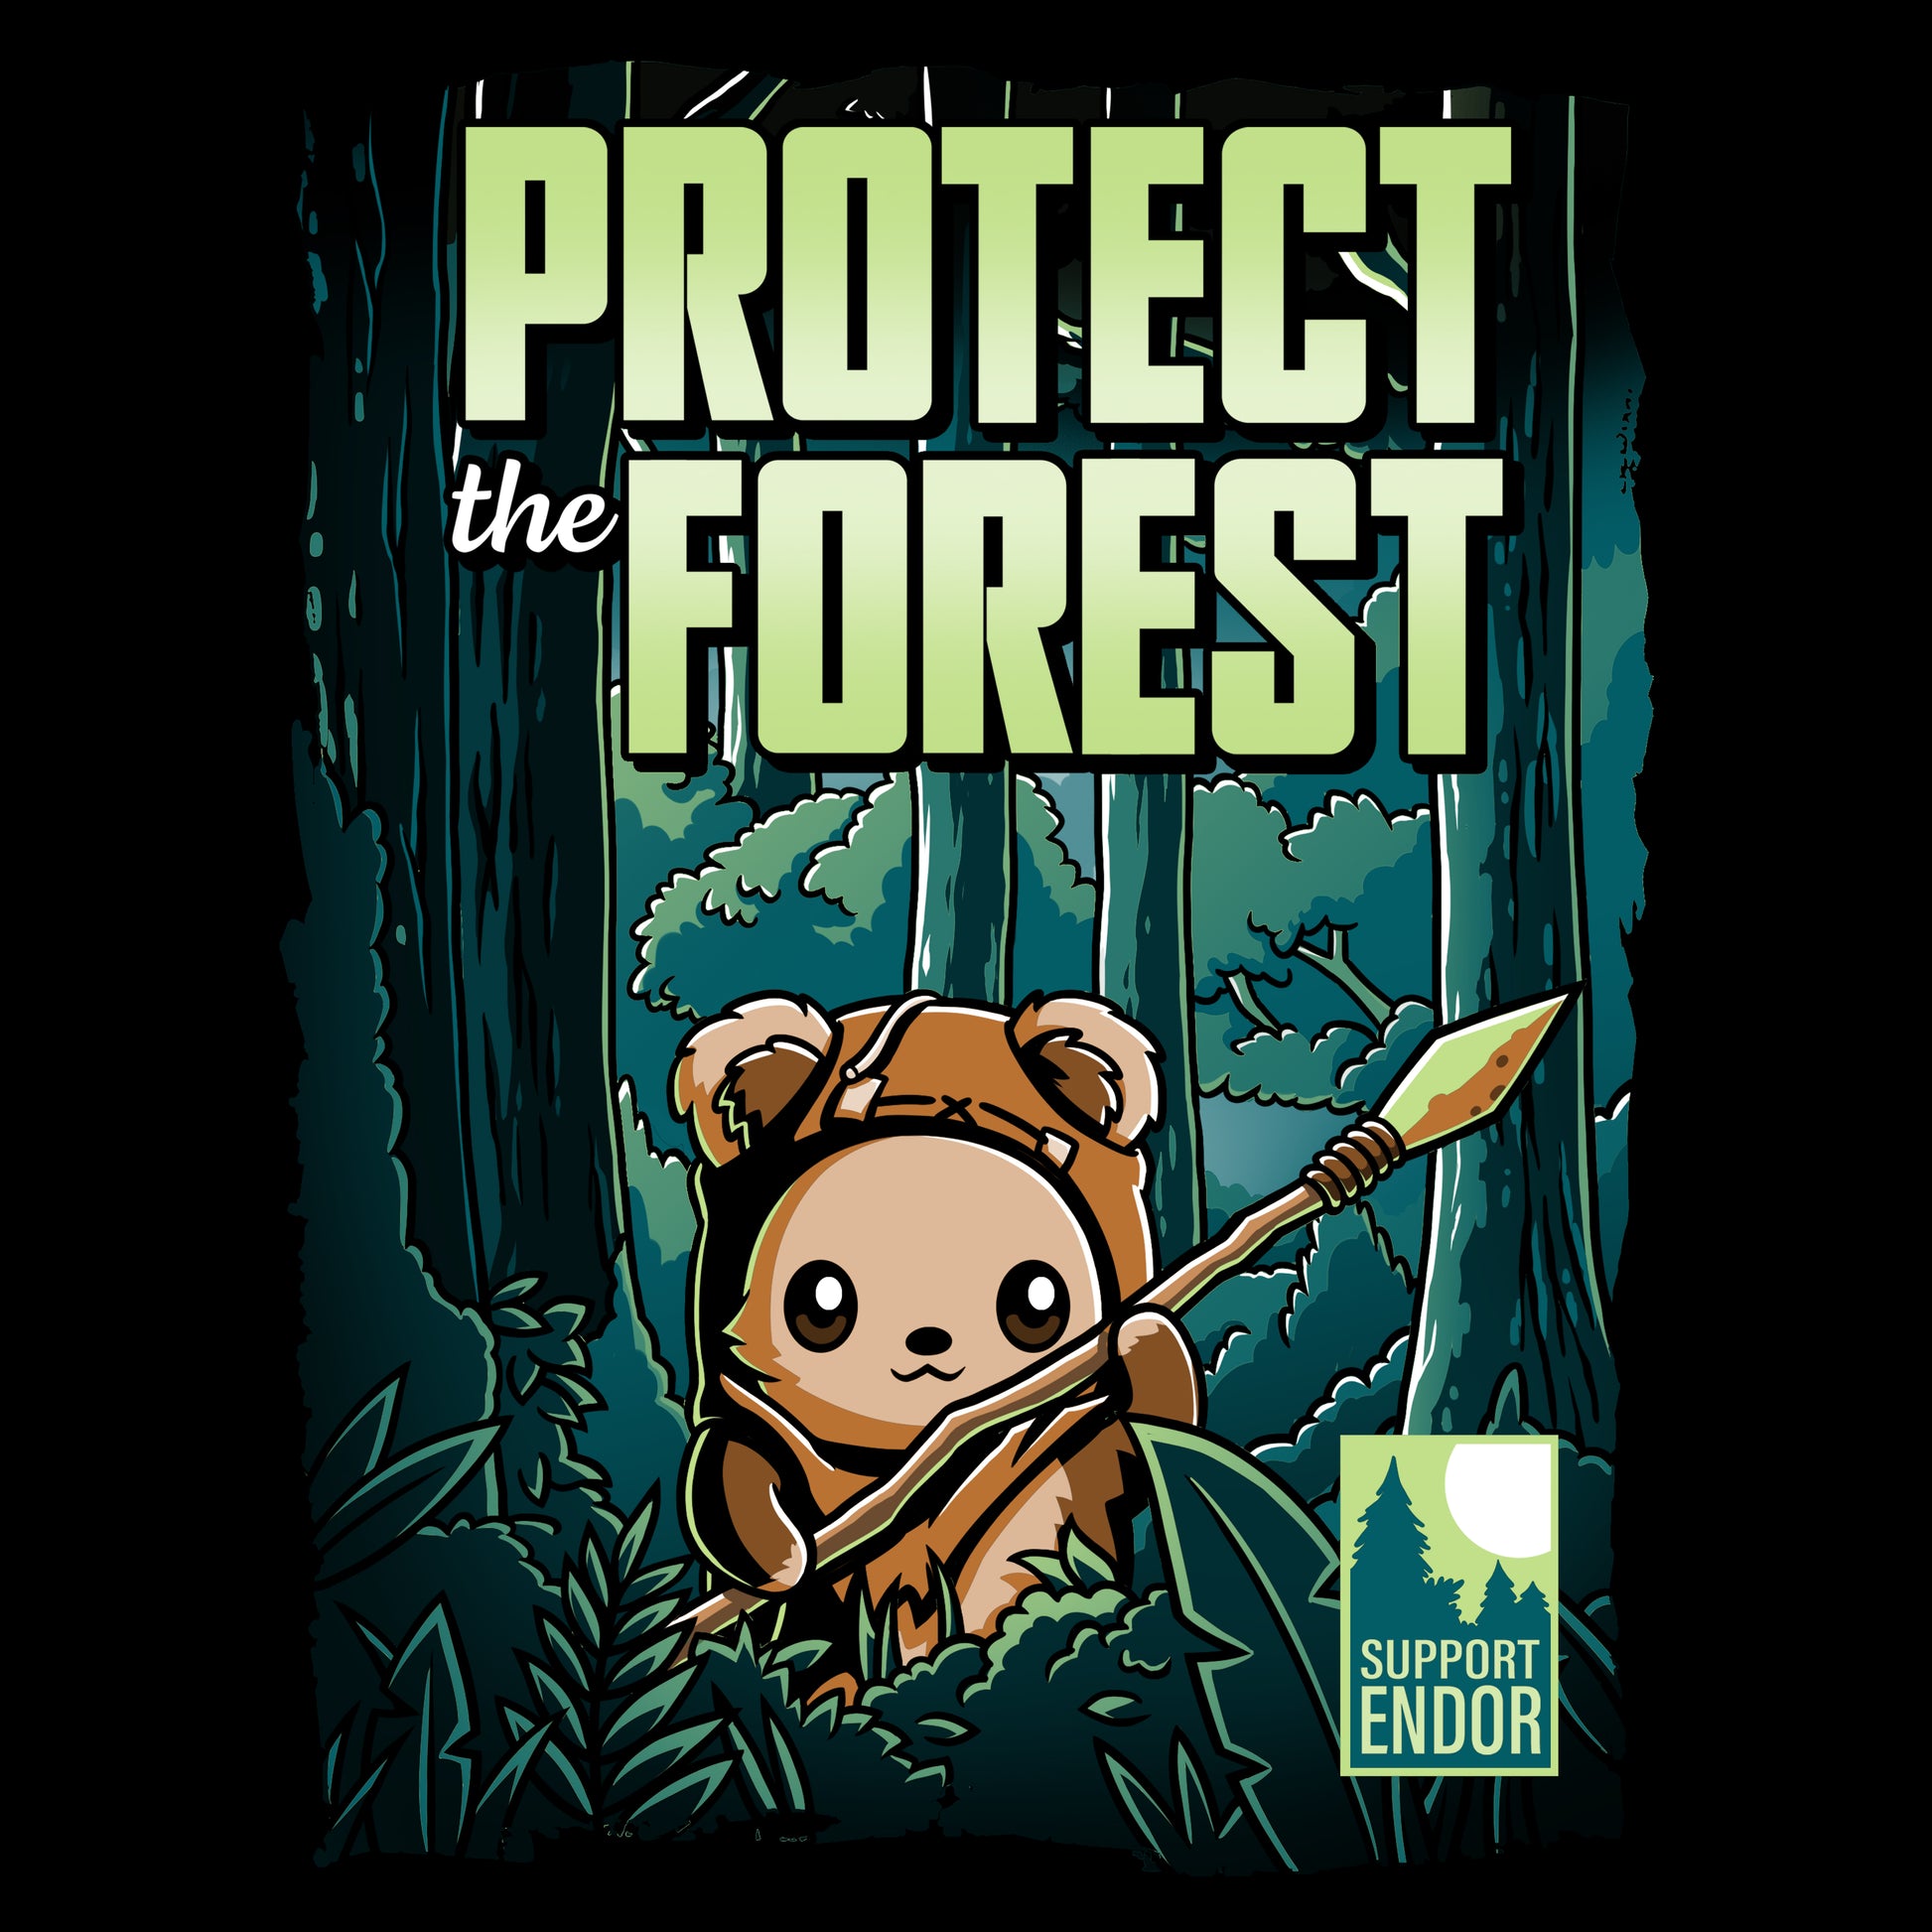 Officially licensed Star Wars t-shirt featuring the Protect the Forest Endor forest.